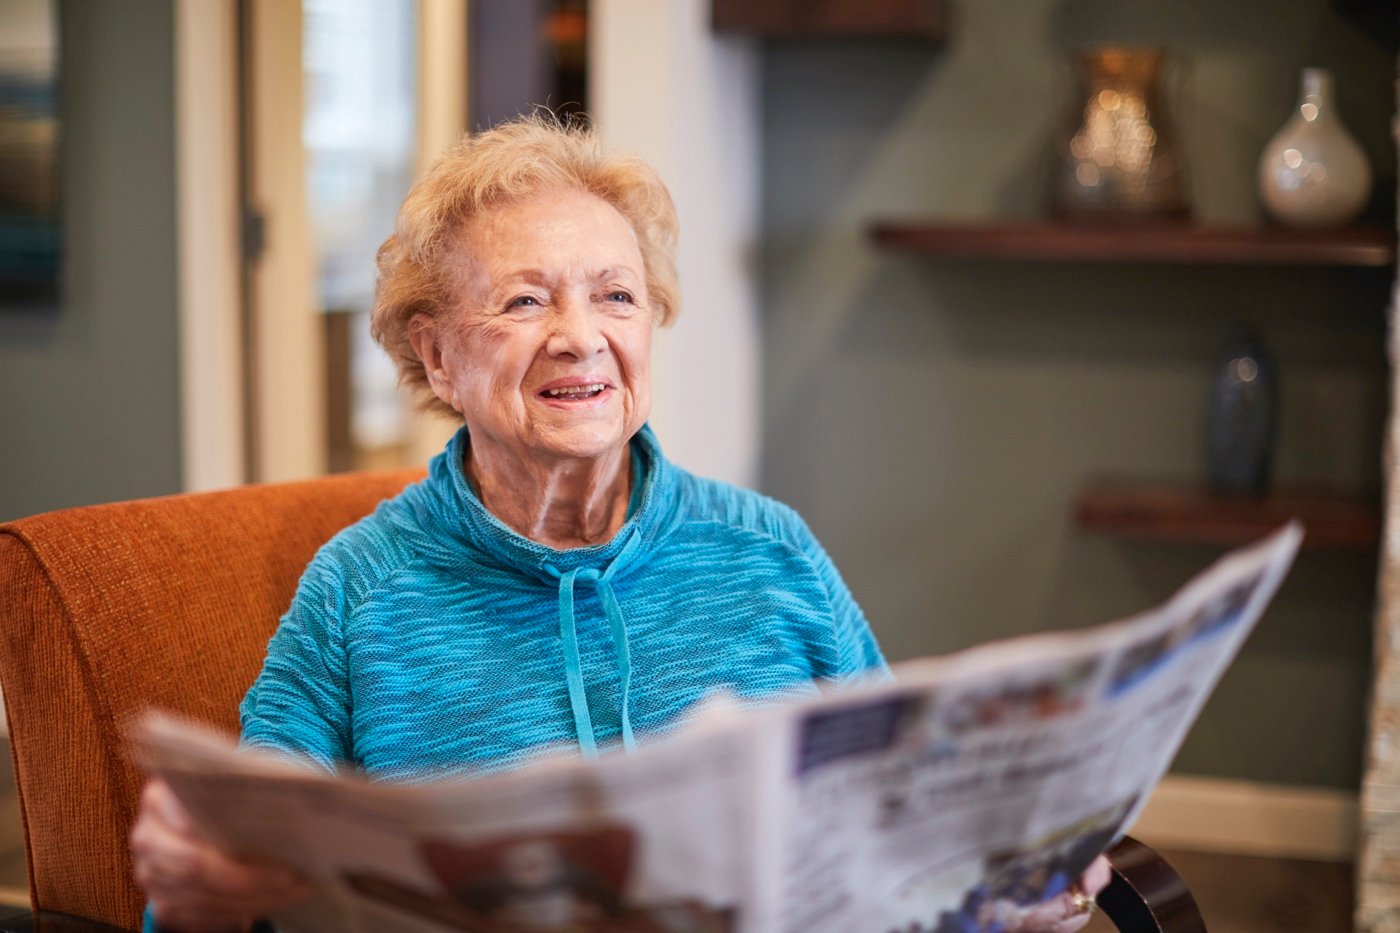 Senior lady reading newspaper in an armchair